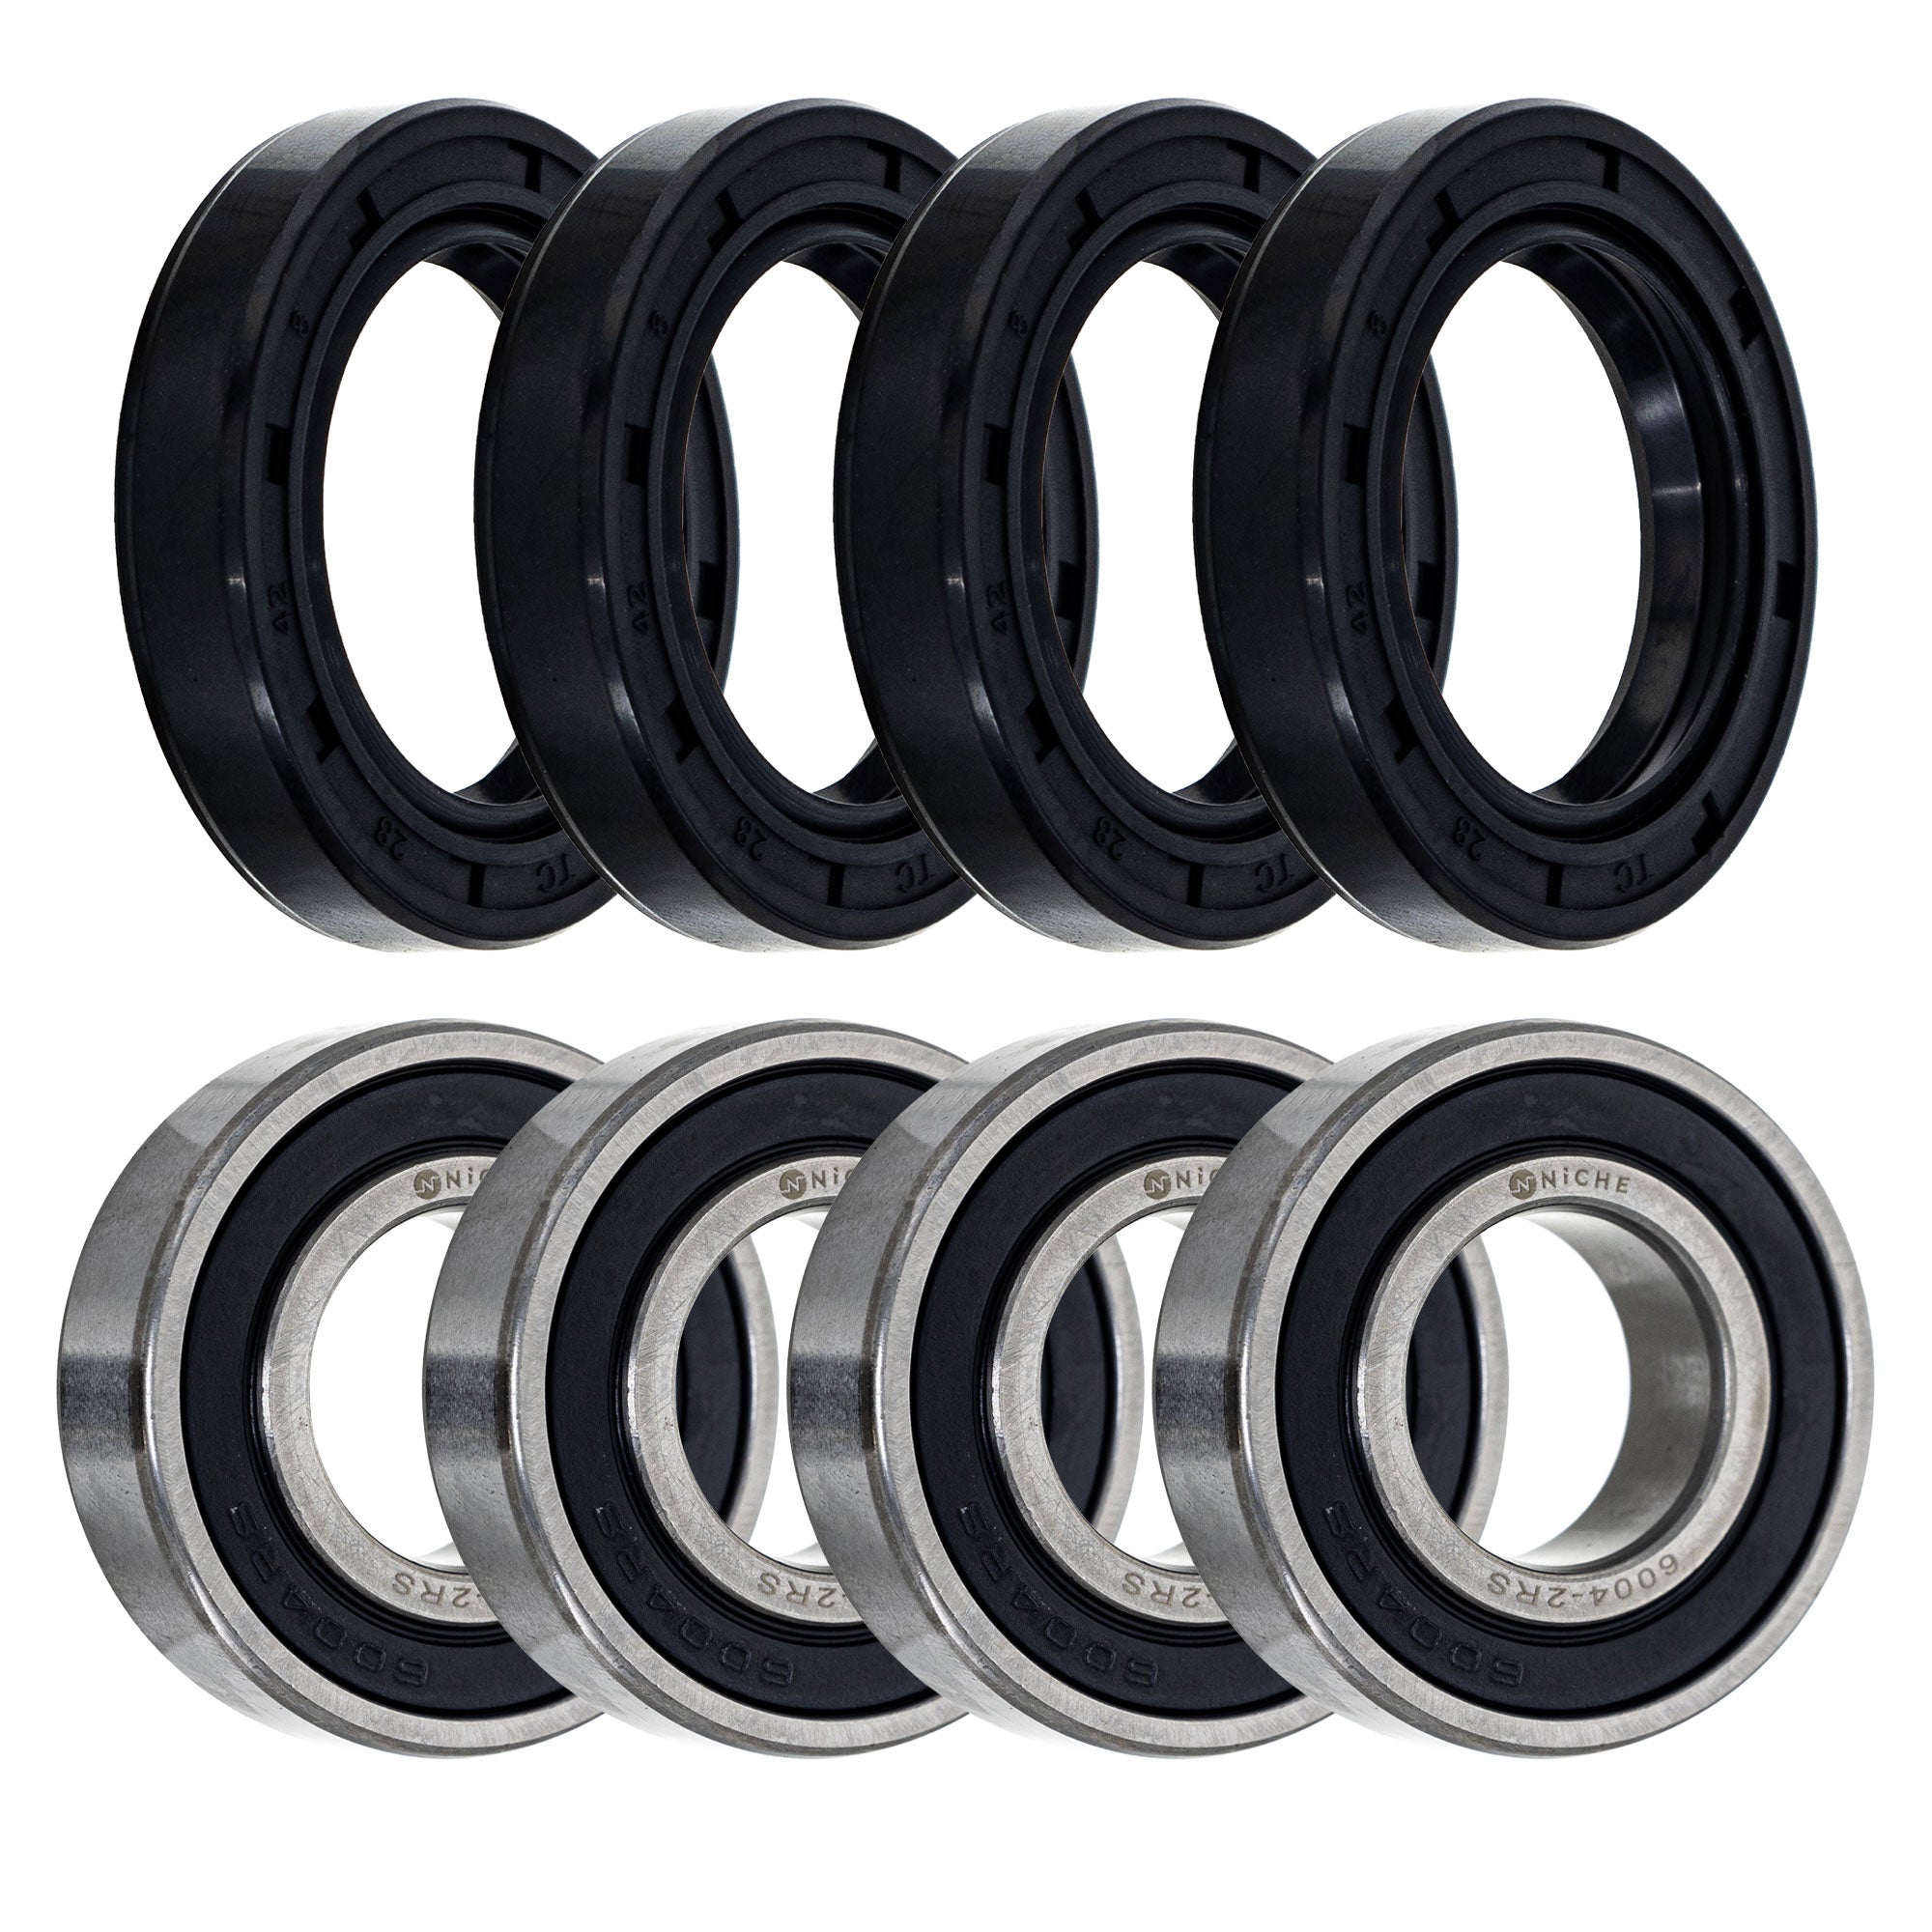 Wheel Bearing Seal Kit for zOTHER Ref No TRX250 Super ST1100 Shadow NICHE MK1008254